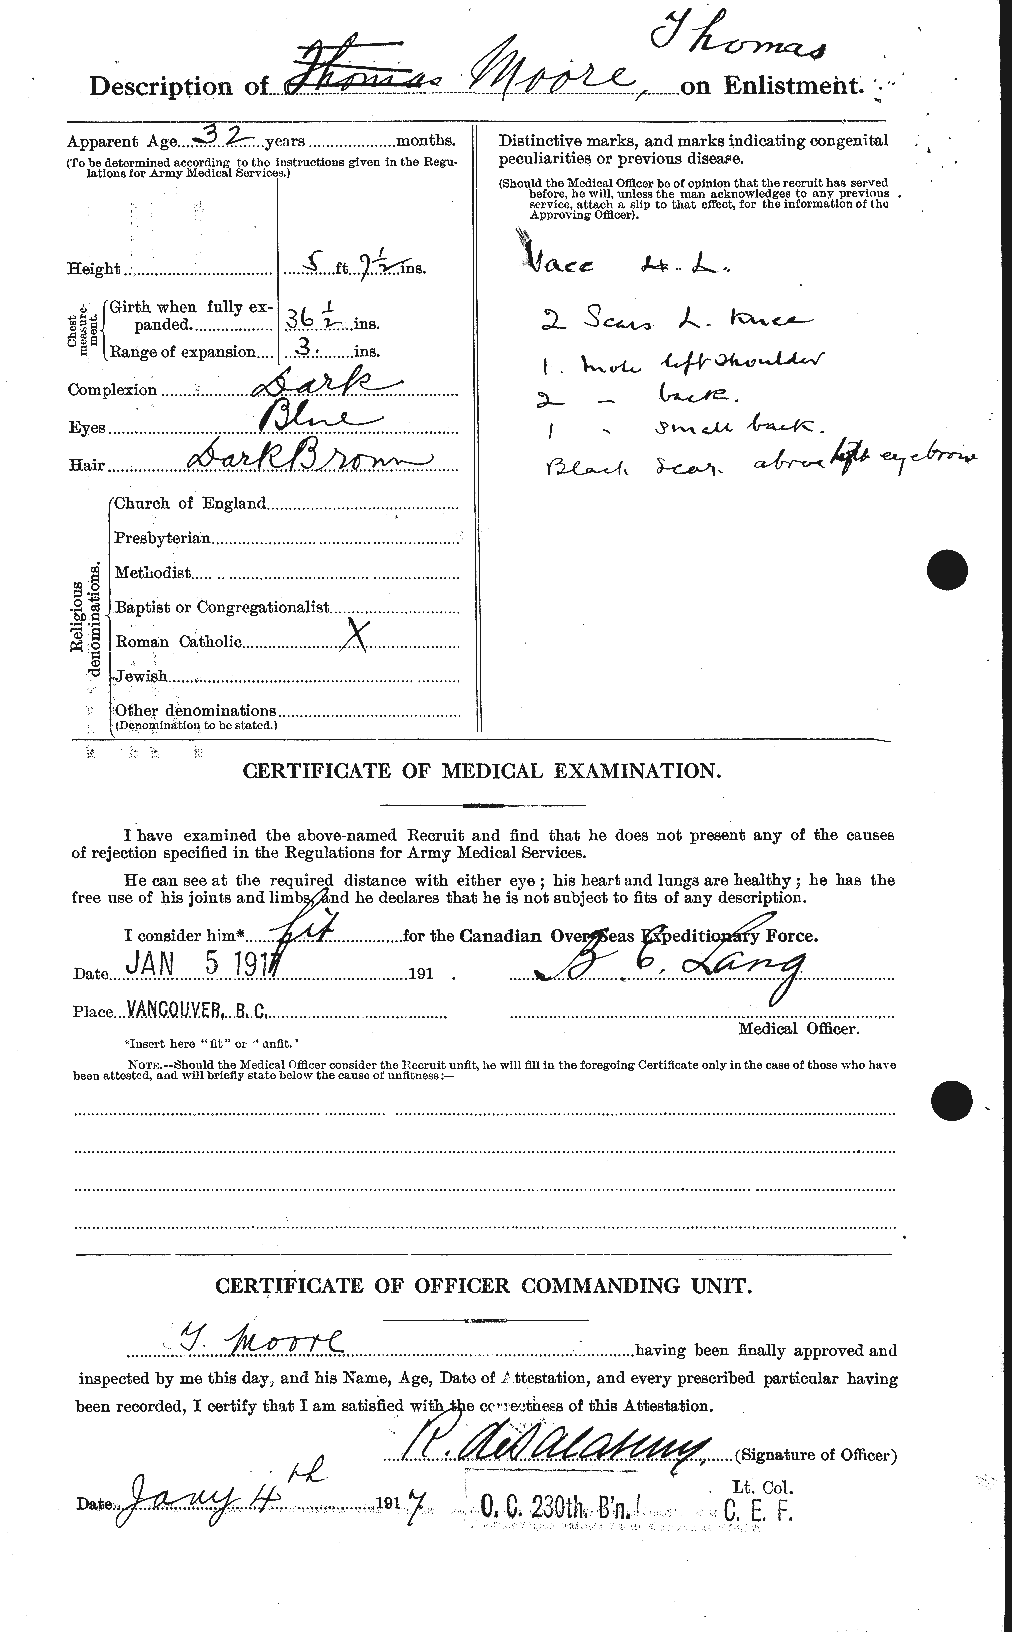 Personnel Records of the First World War - CEF 505609b